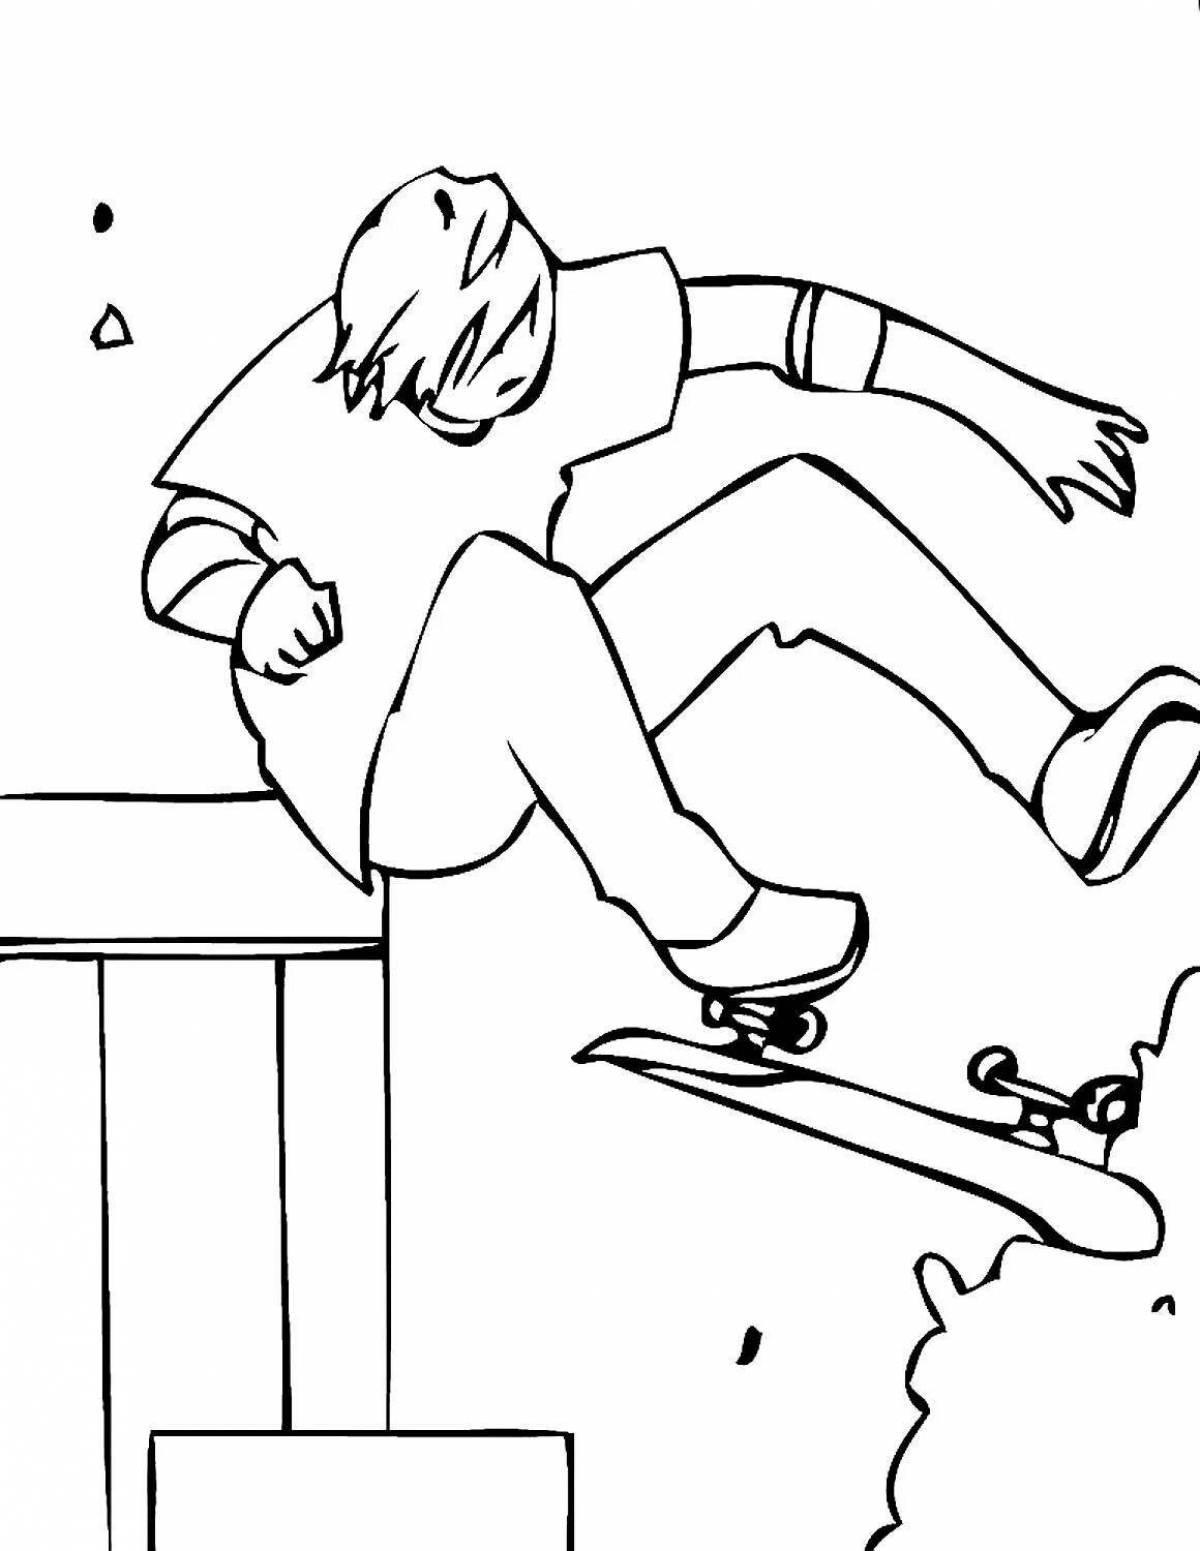 Coloring page stylish skateboarder